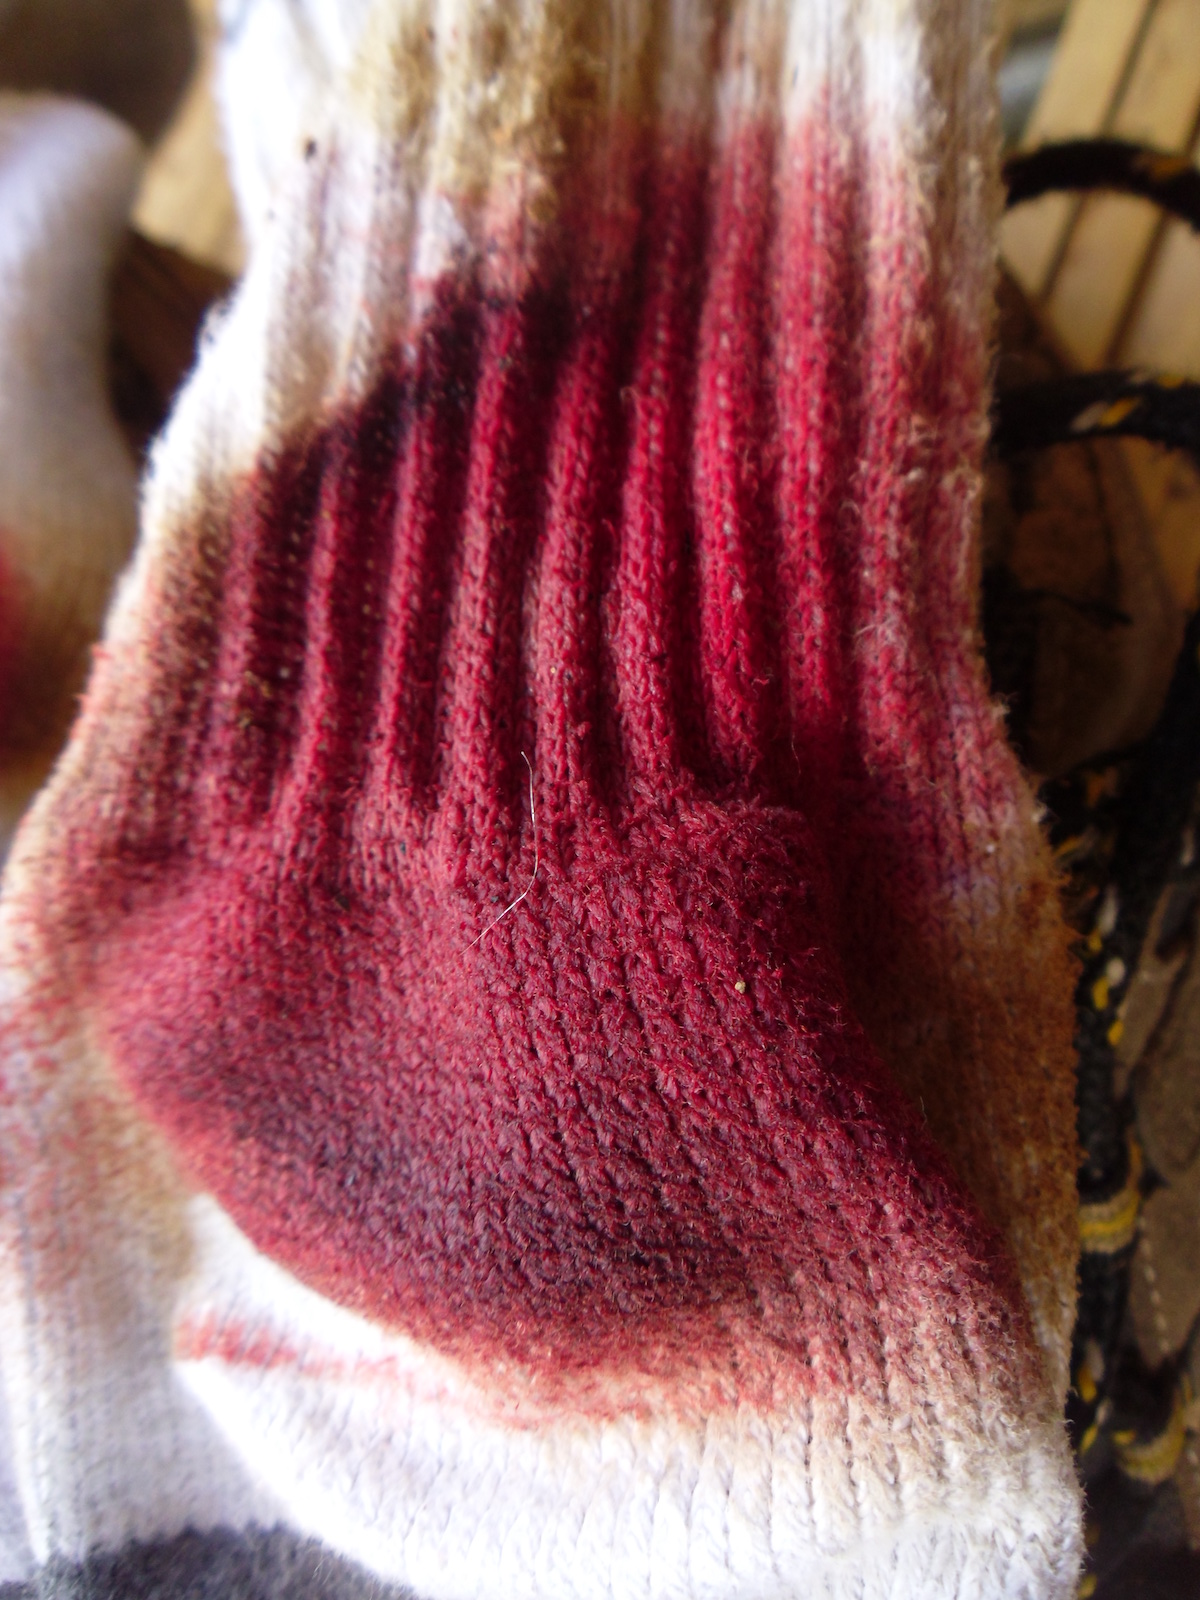 Blood-drenched sock